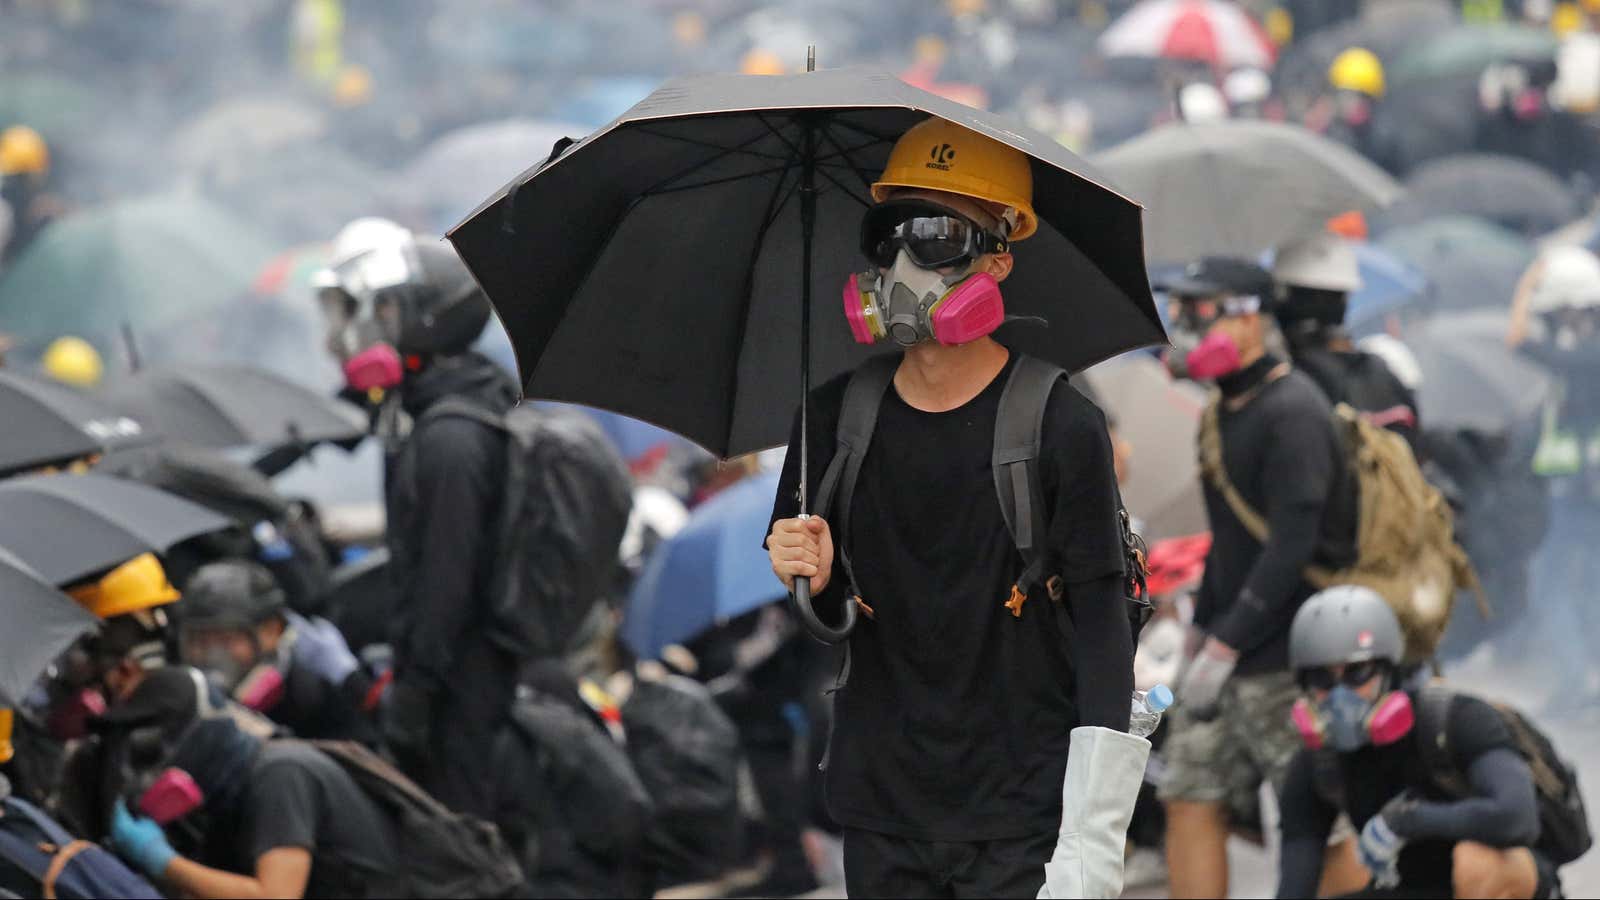 The Hong Kong protests are getting creative.